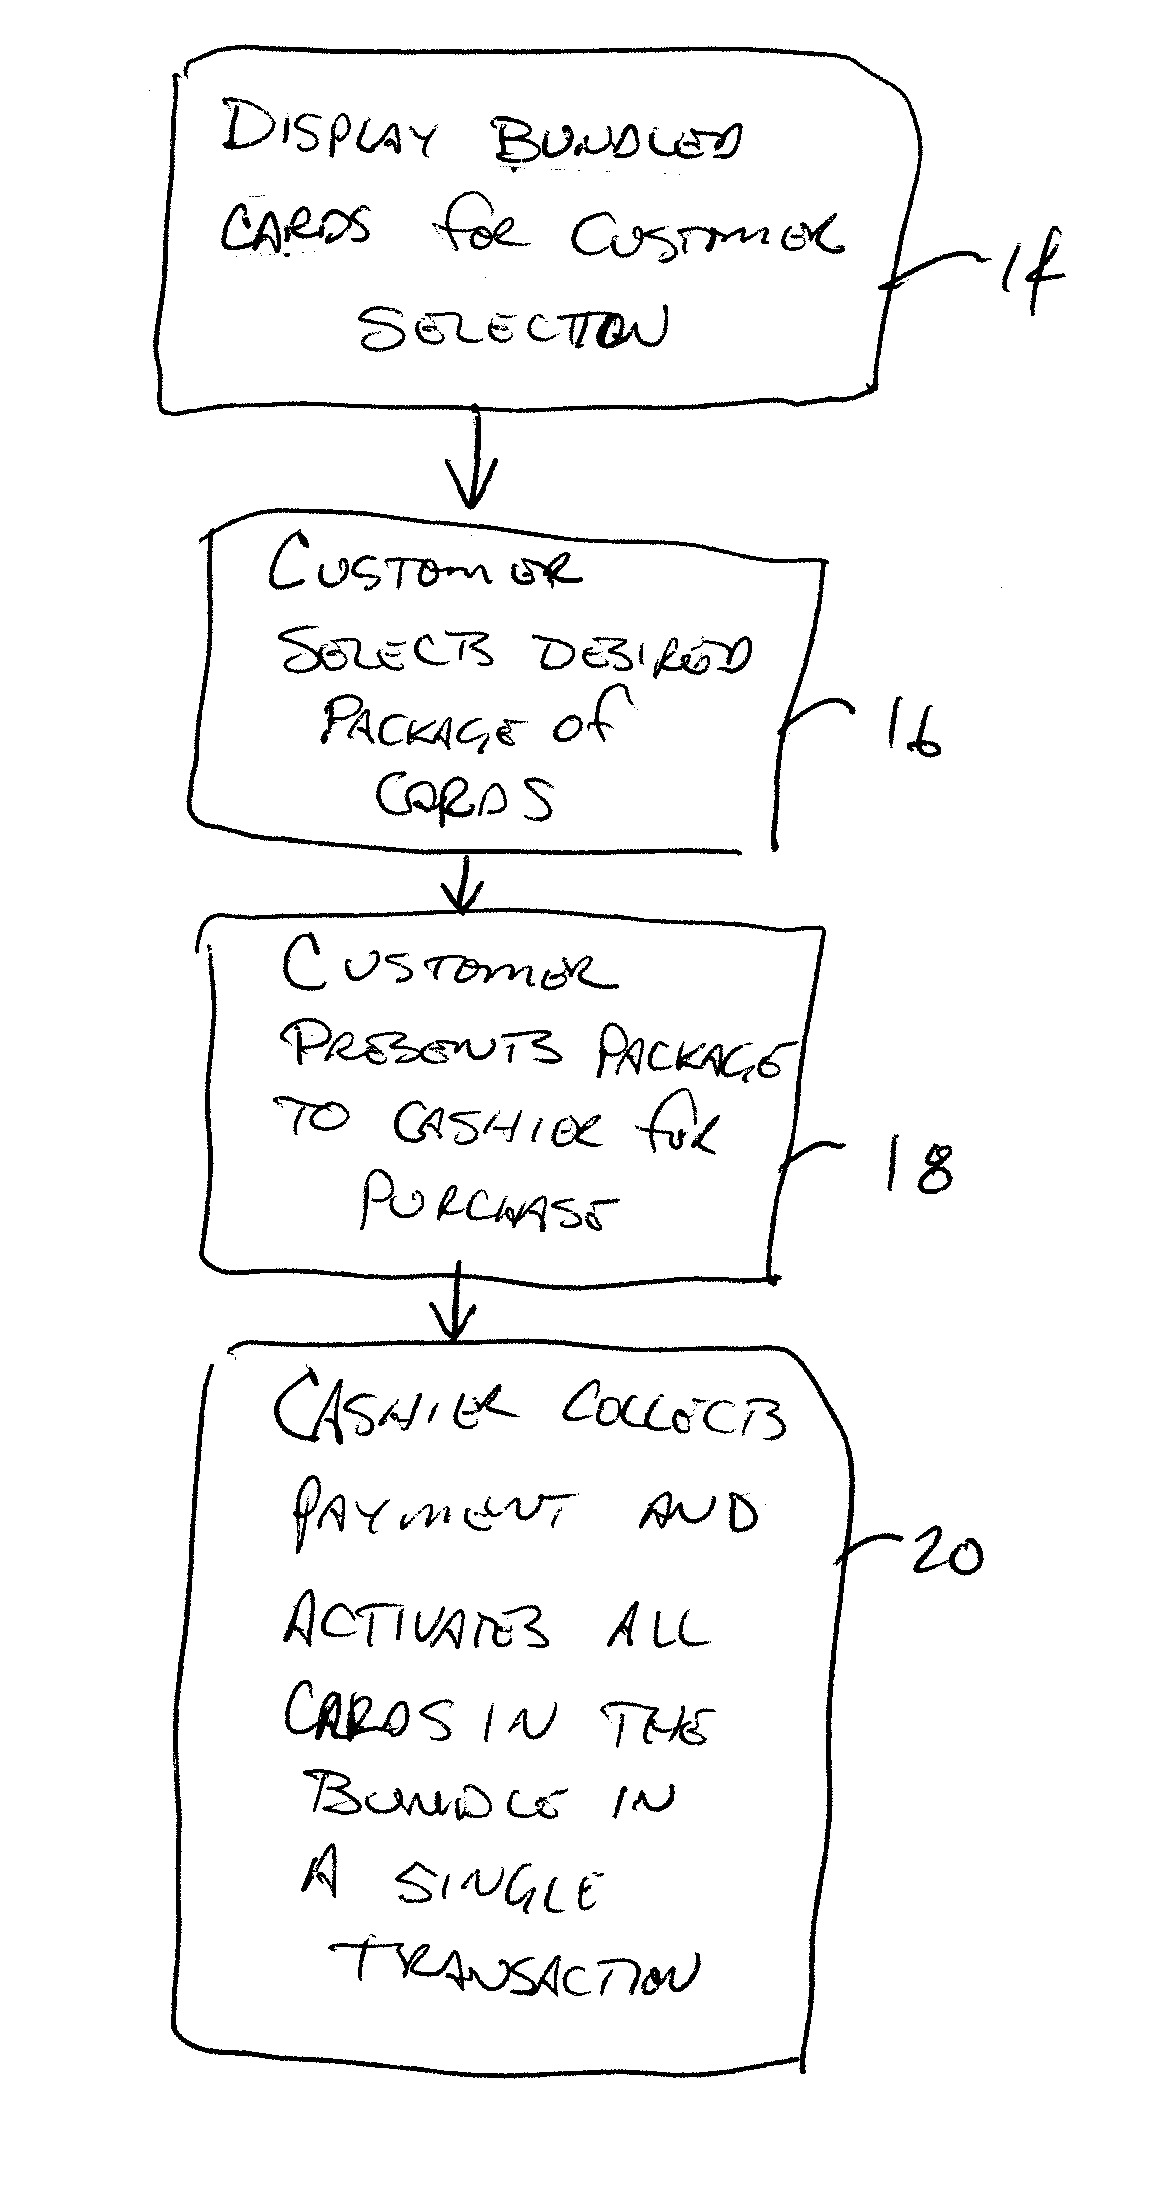 Method of bundling activation and sales of gift cards